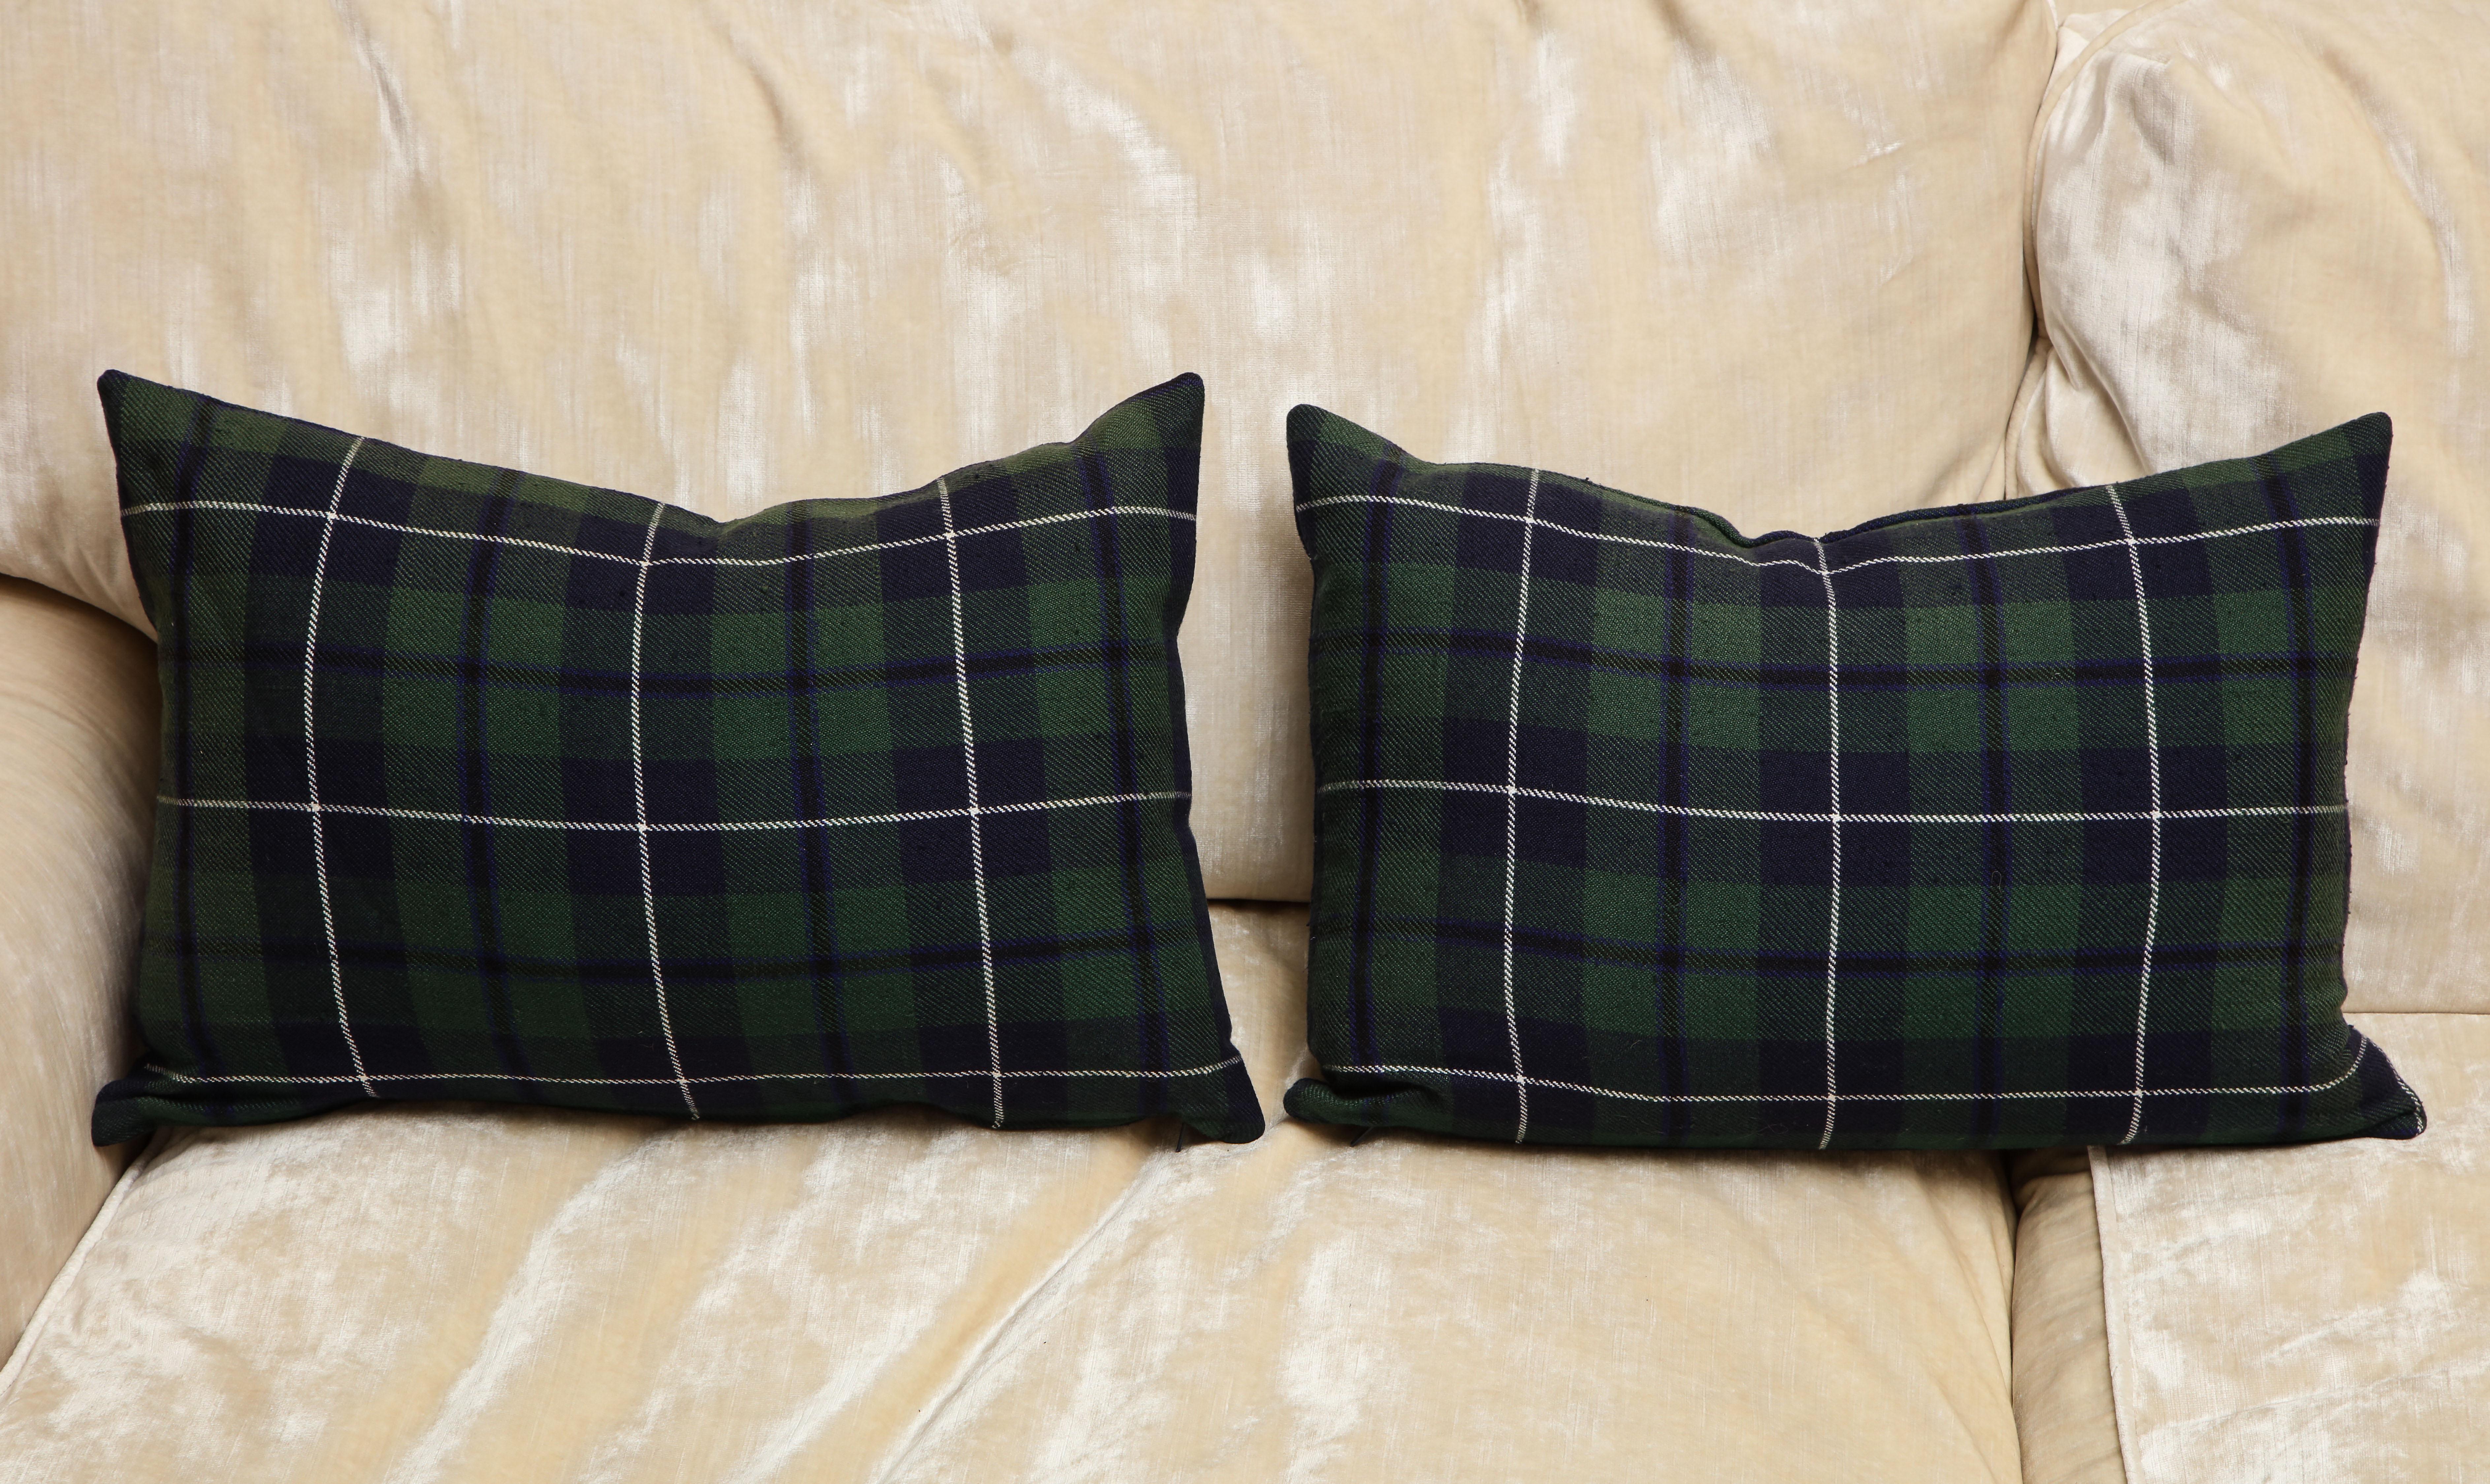 The Tartans pillows are one of a kind. The woven wool style is associated to Clan Urquhart from Scotland. It's navy blue and forest green plaid is typically from them. This pair of custom-made pillows are designed by Arlene Angard and
with a insert